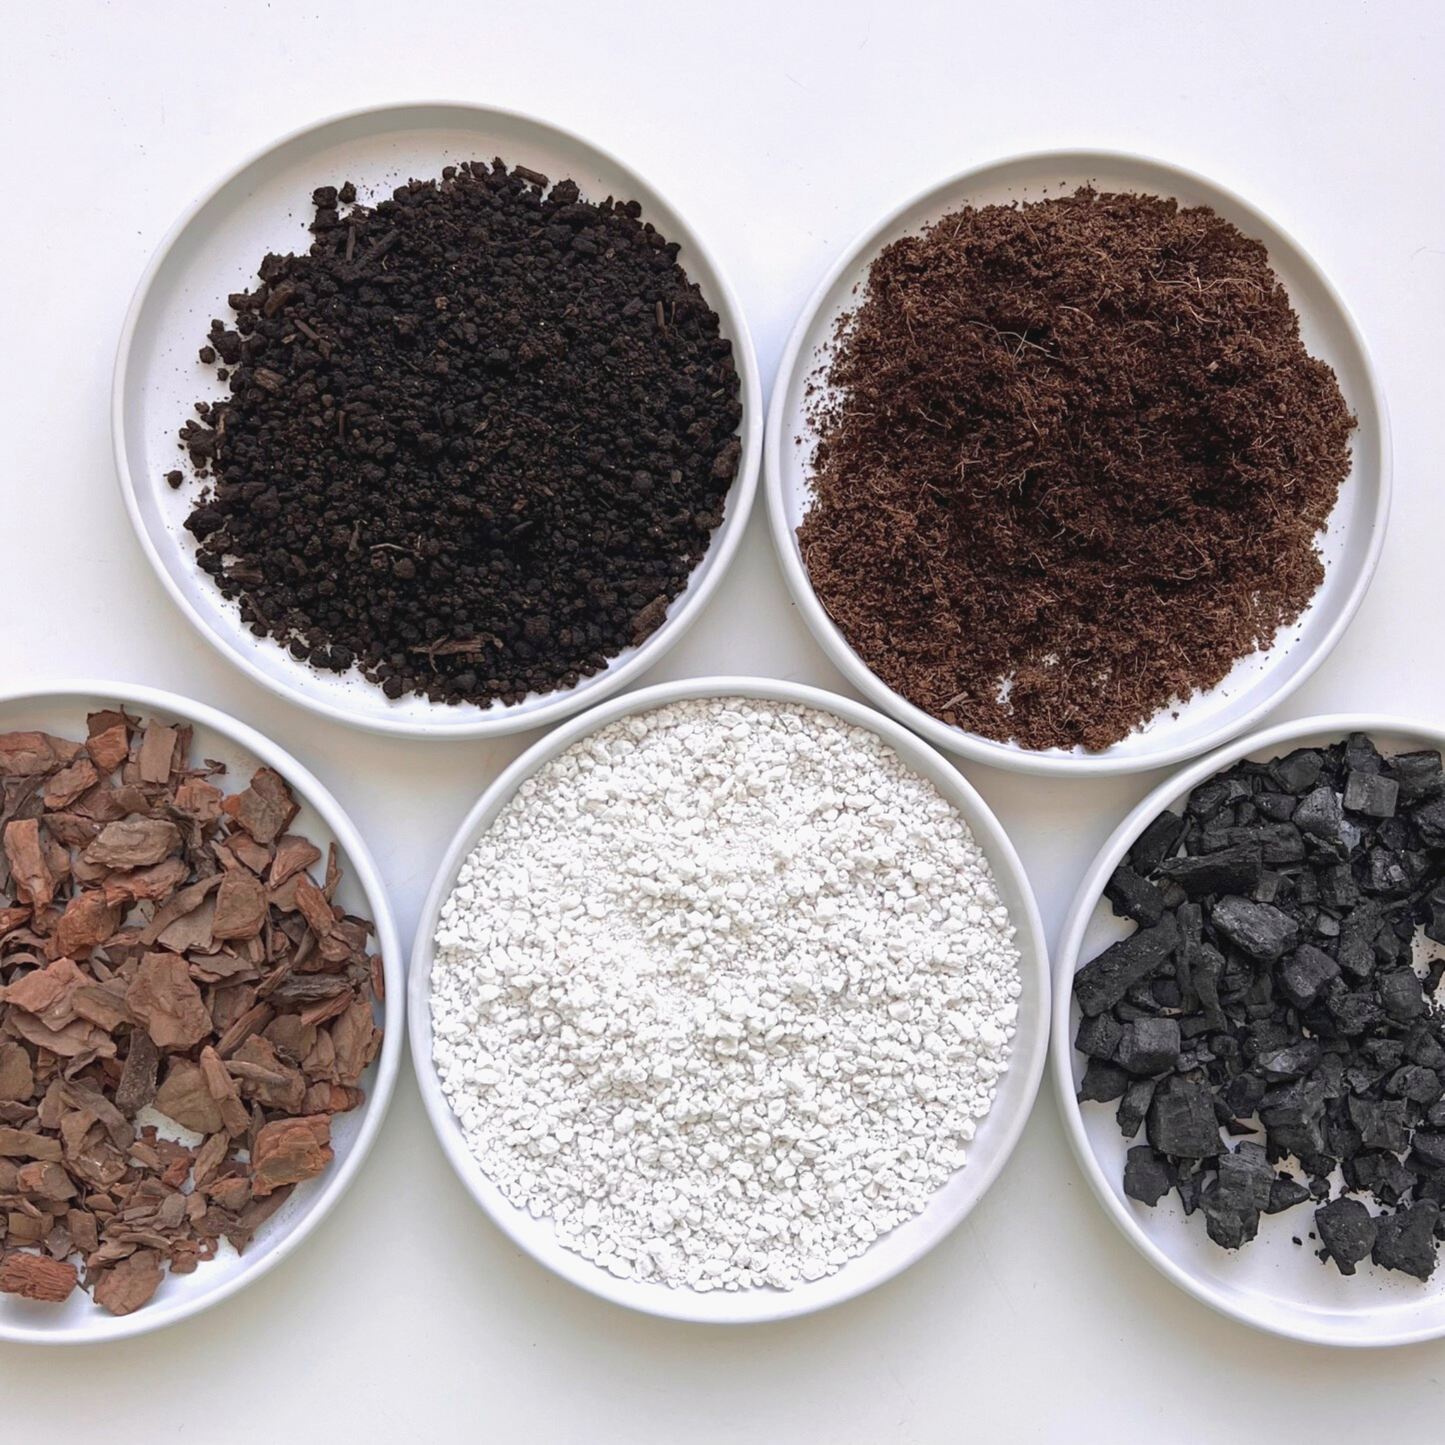 A ingredient makeup of Birdy's Plants Premium Philodendron + Monstera Soil Mix including activated horticultural charcoal, orchid bark, coarse perlite, worm castings, and coco coir.